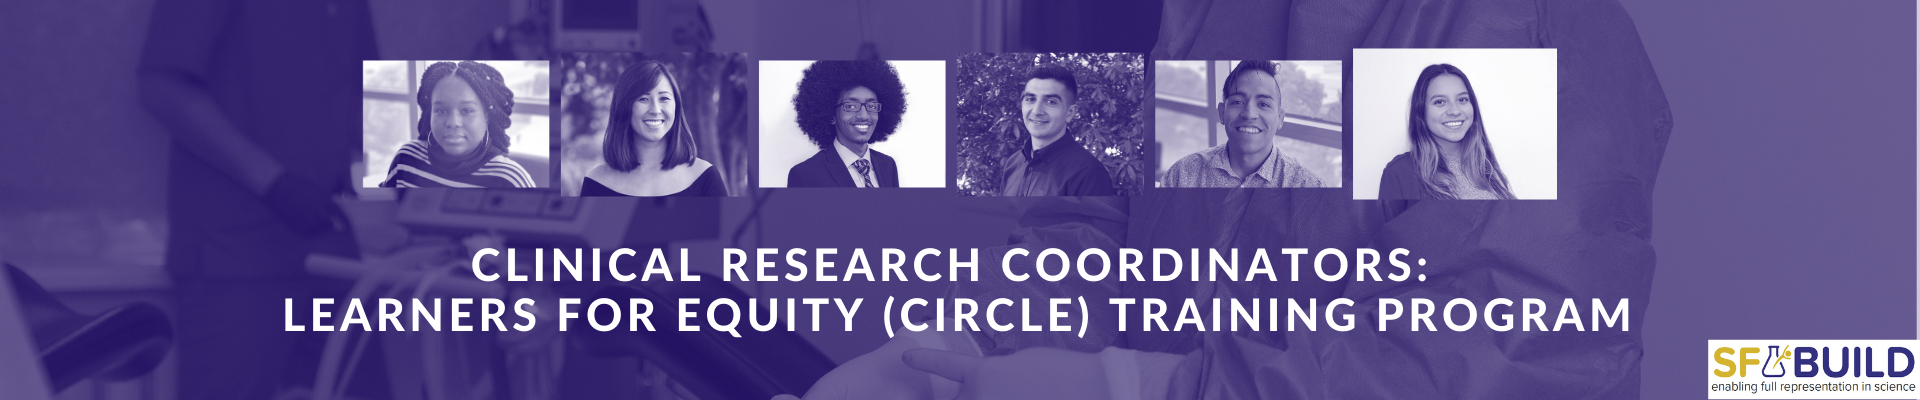 A collage of 6 SF BUILD scholar portraits and a text under that reads "Clinical Research Coordinators: Learners For Equity (CIRCLE) Training Program